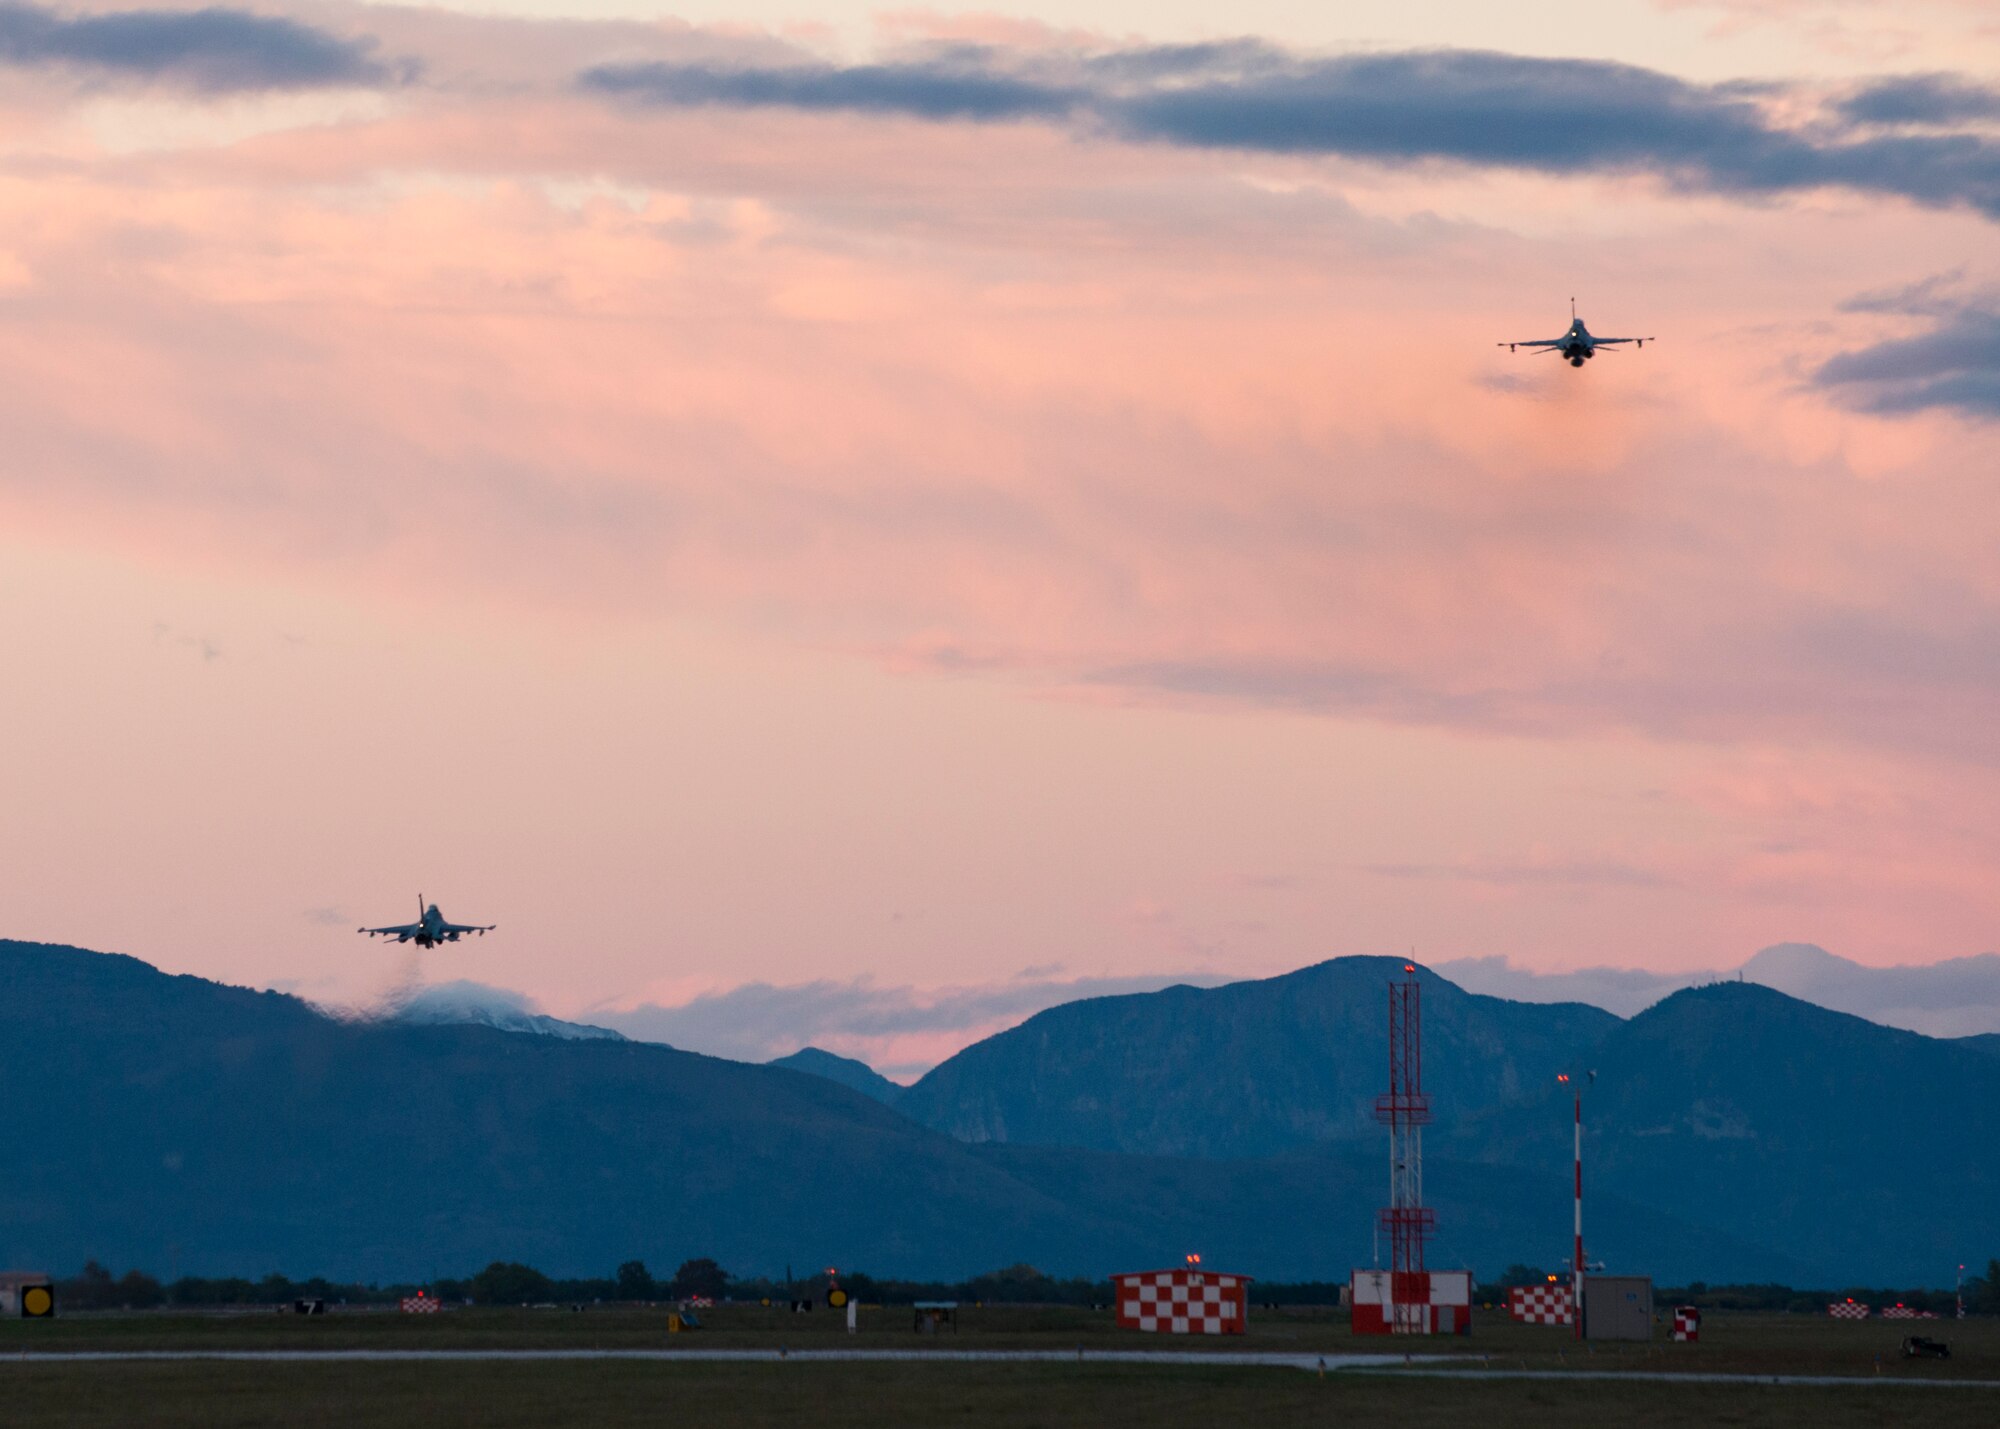 Two F-16 Fighting Falcons fly over Aviano Air Base, Italy on Oct. 20, 2016. The 555th and 510th Fighter Squadrons ensure the 31st Fighter Wing is ready to deliver combat air power and support across the globe. (U.S. Air Force photo by Staff Sgt. Krystal Ardrey/Released)